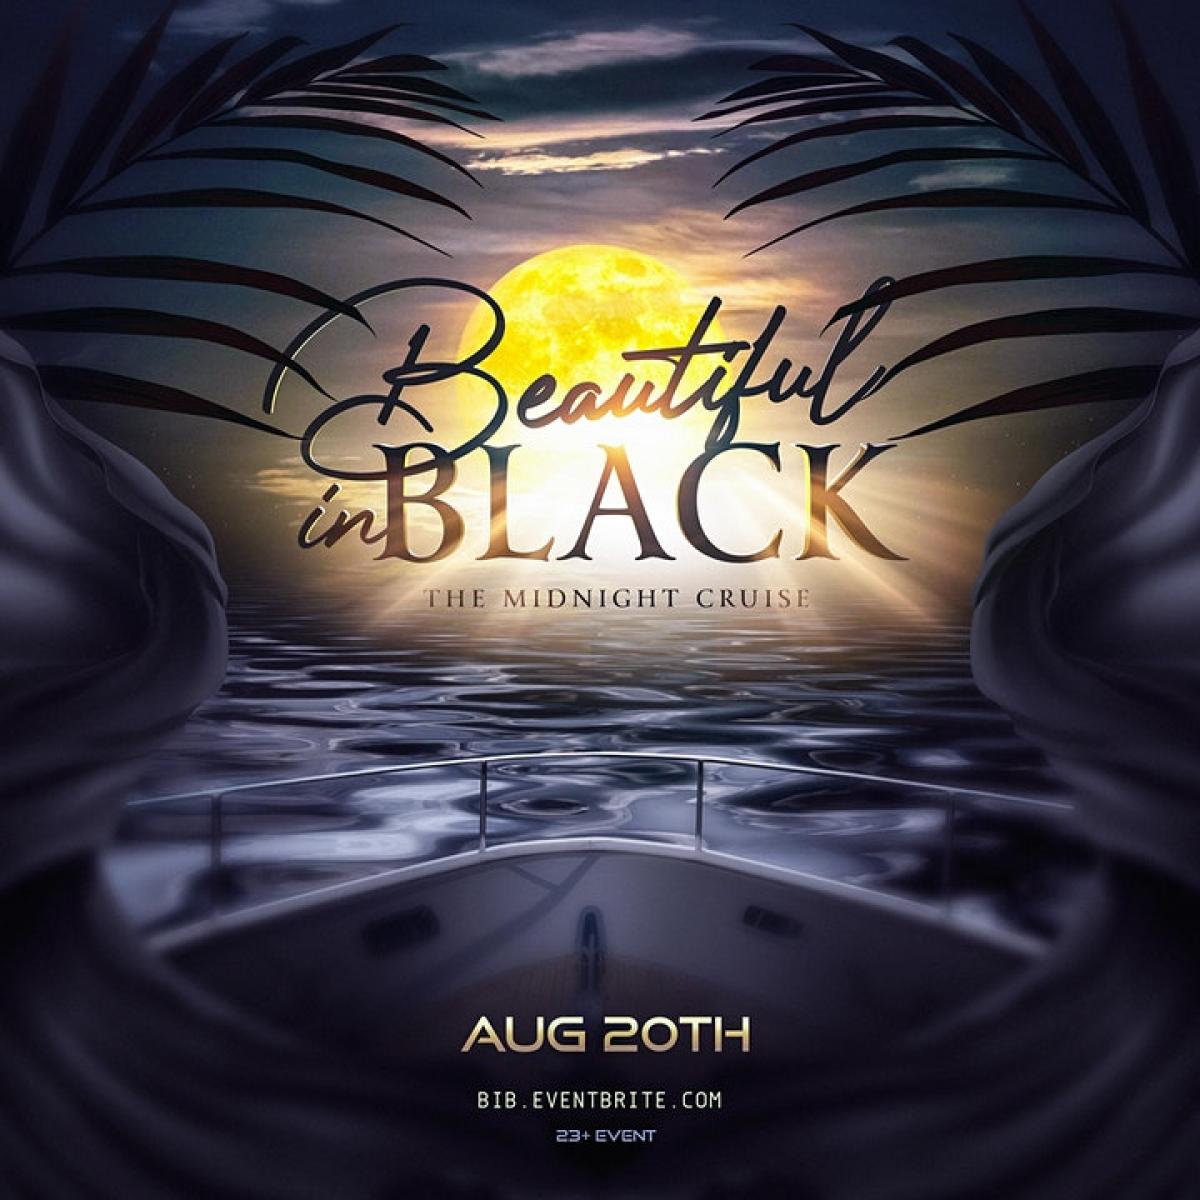 Beautiful in Black flyer or graphic.